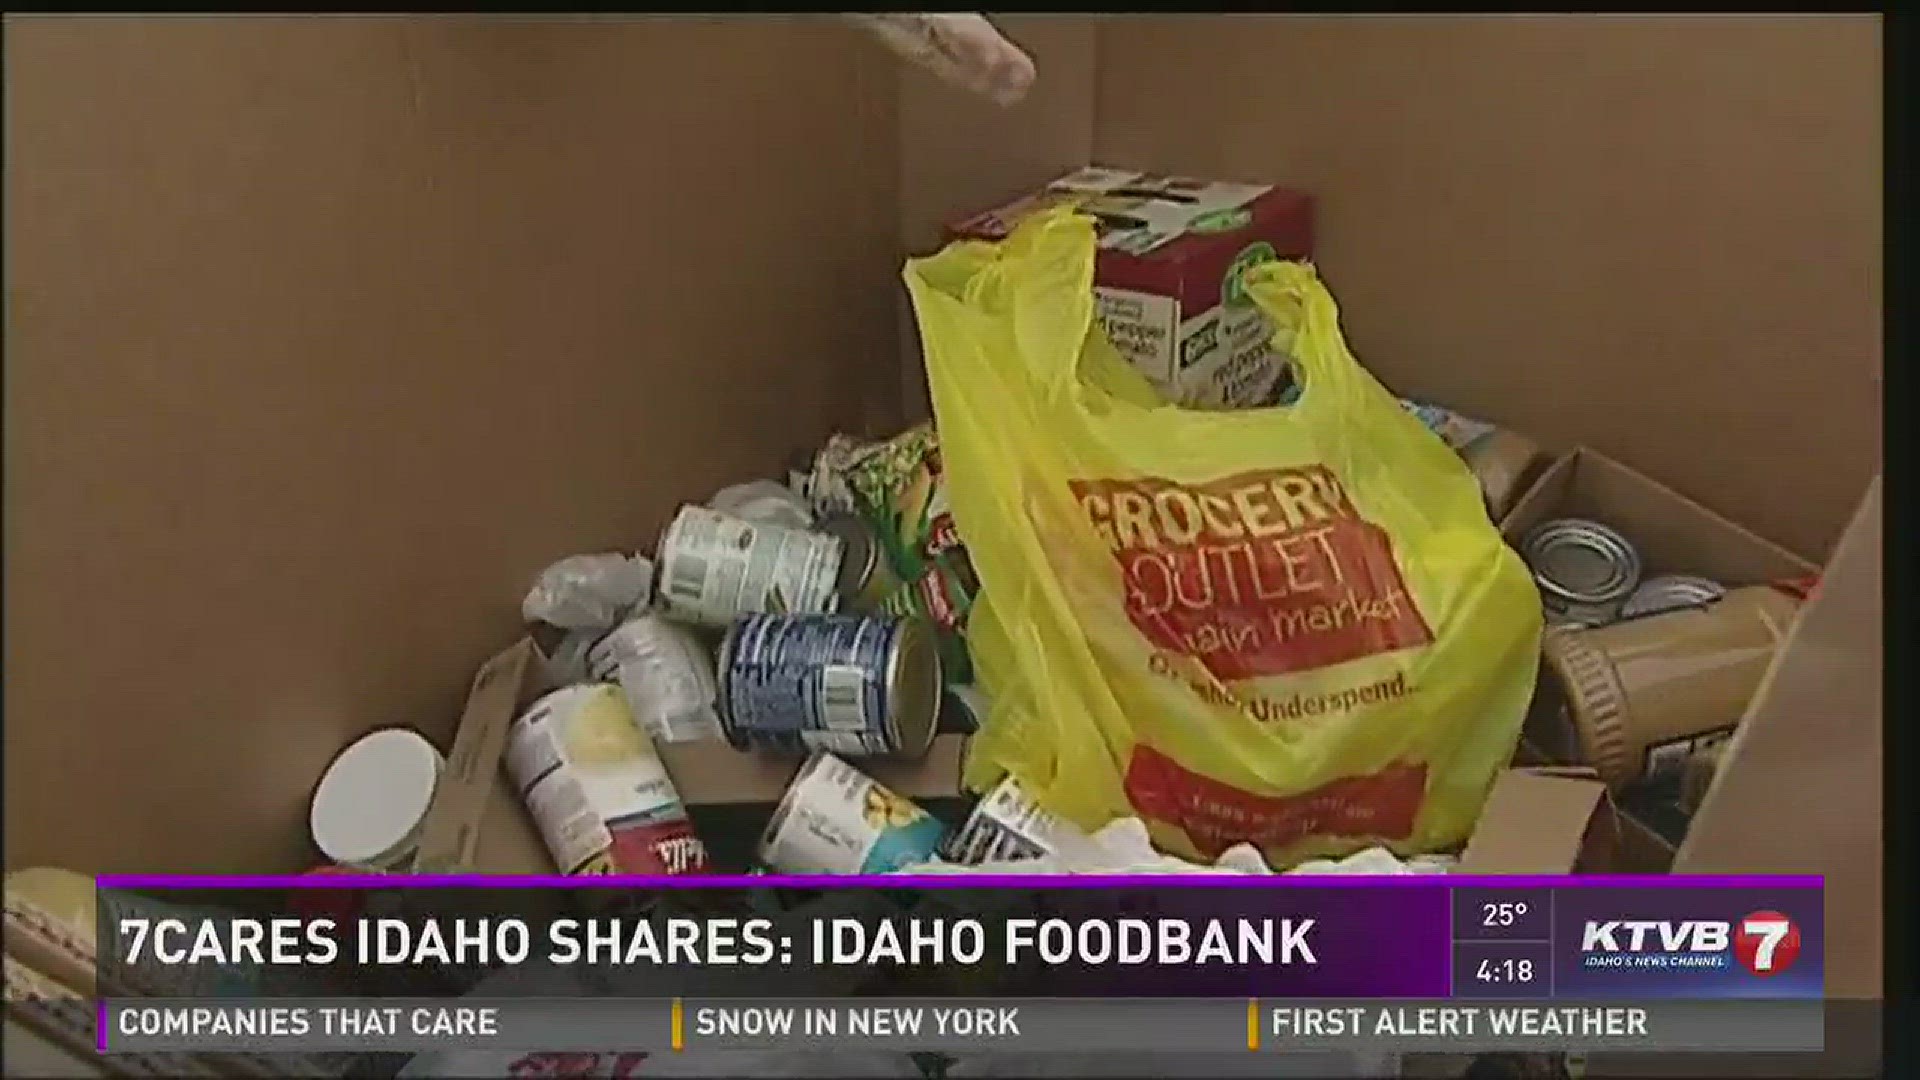 Joe Parris has a preview of how the event helps the Idaho Foodbank.